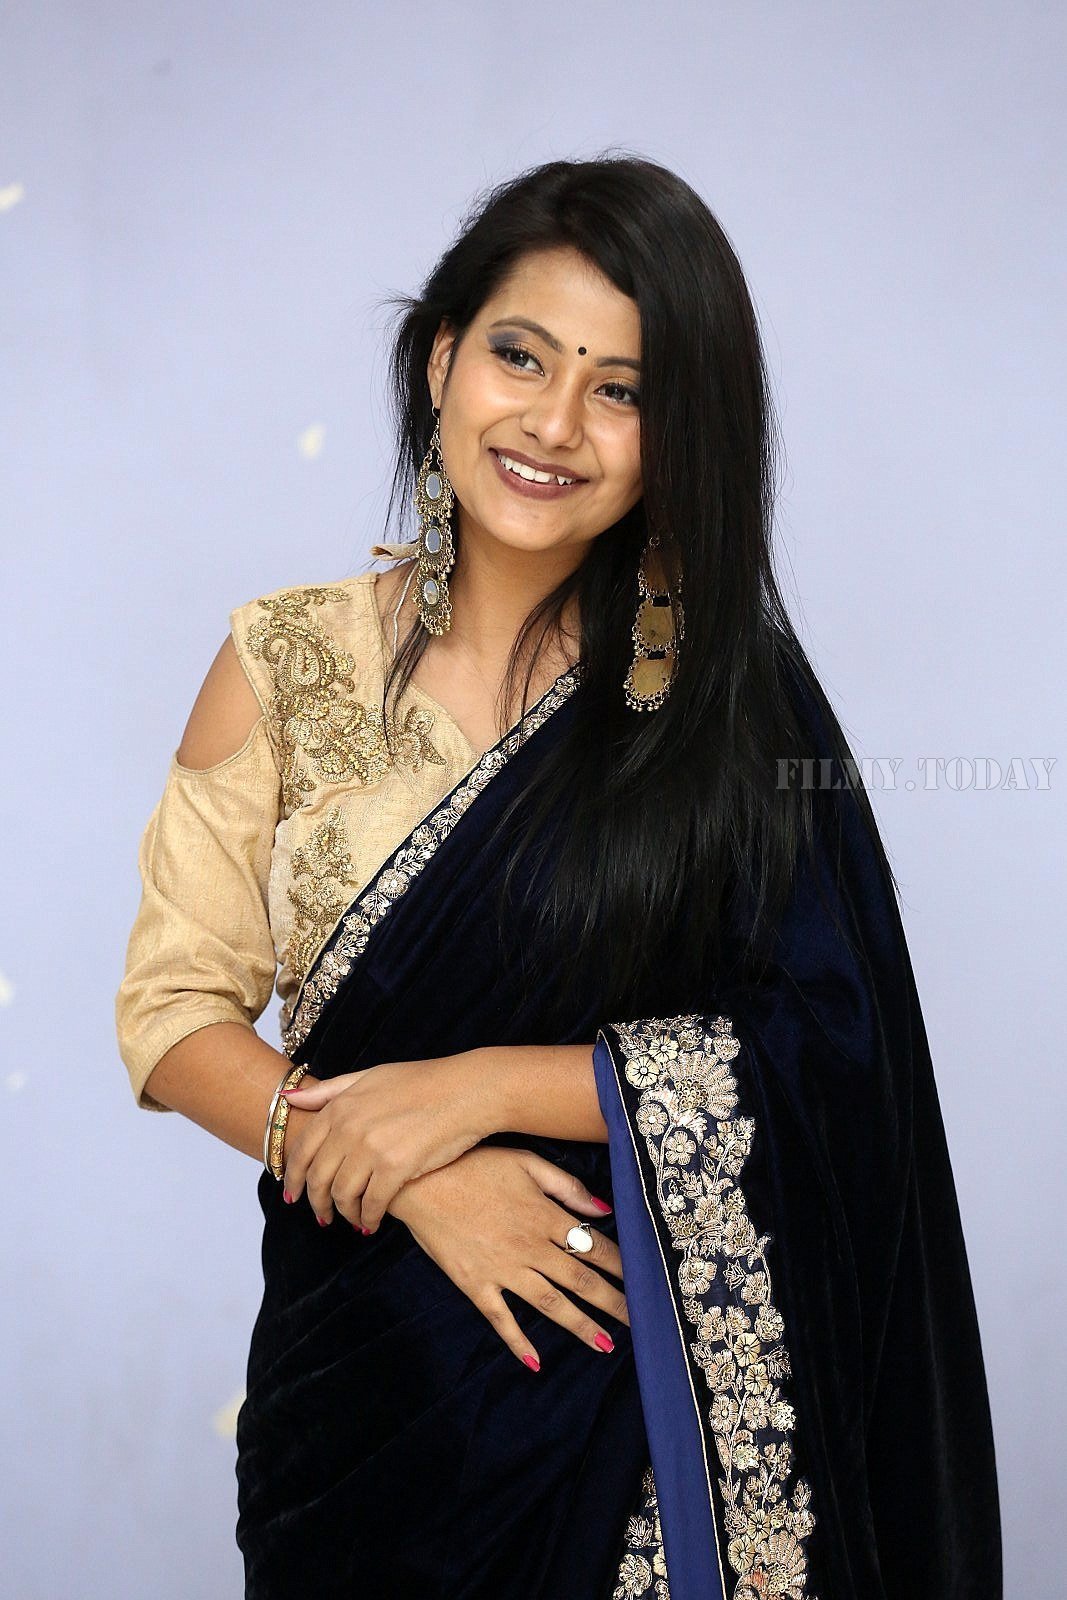 Shubhangi Pant - Itlu Anjali Movie Teaser Launch Photos | Picture 1645926